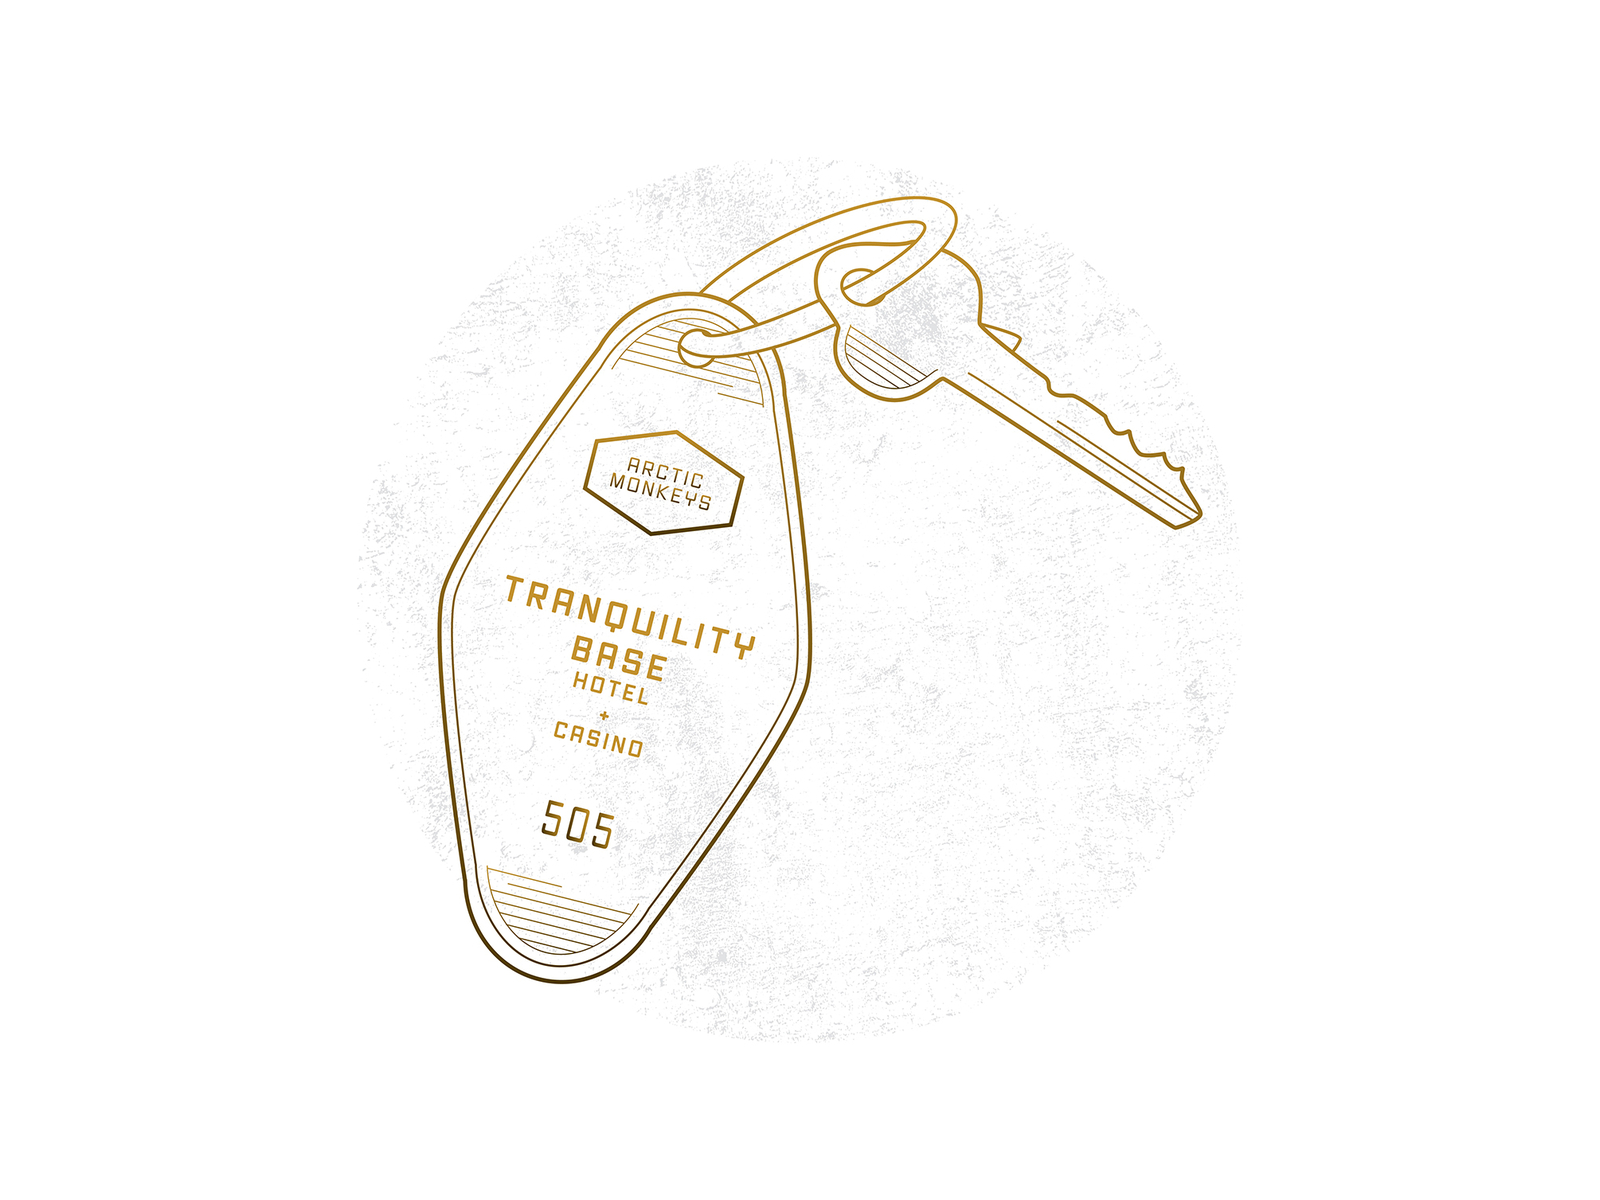 Tranquility Base Hotel and Casino by Courtney Walker on Dribbble